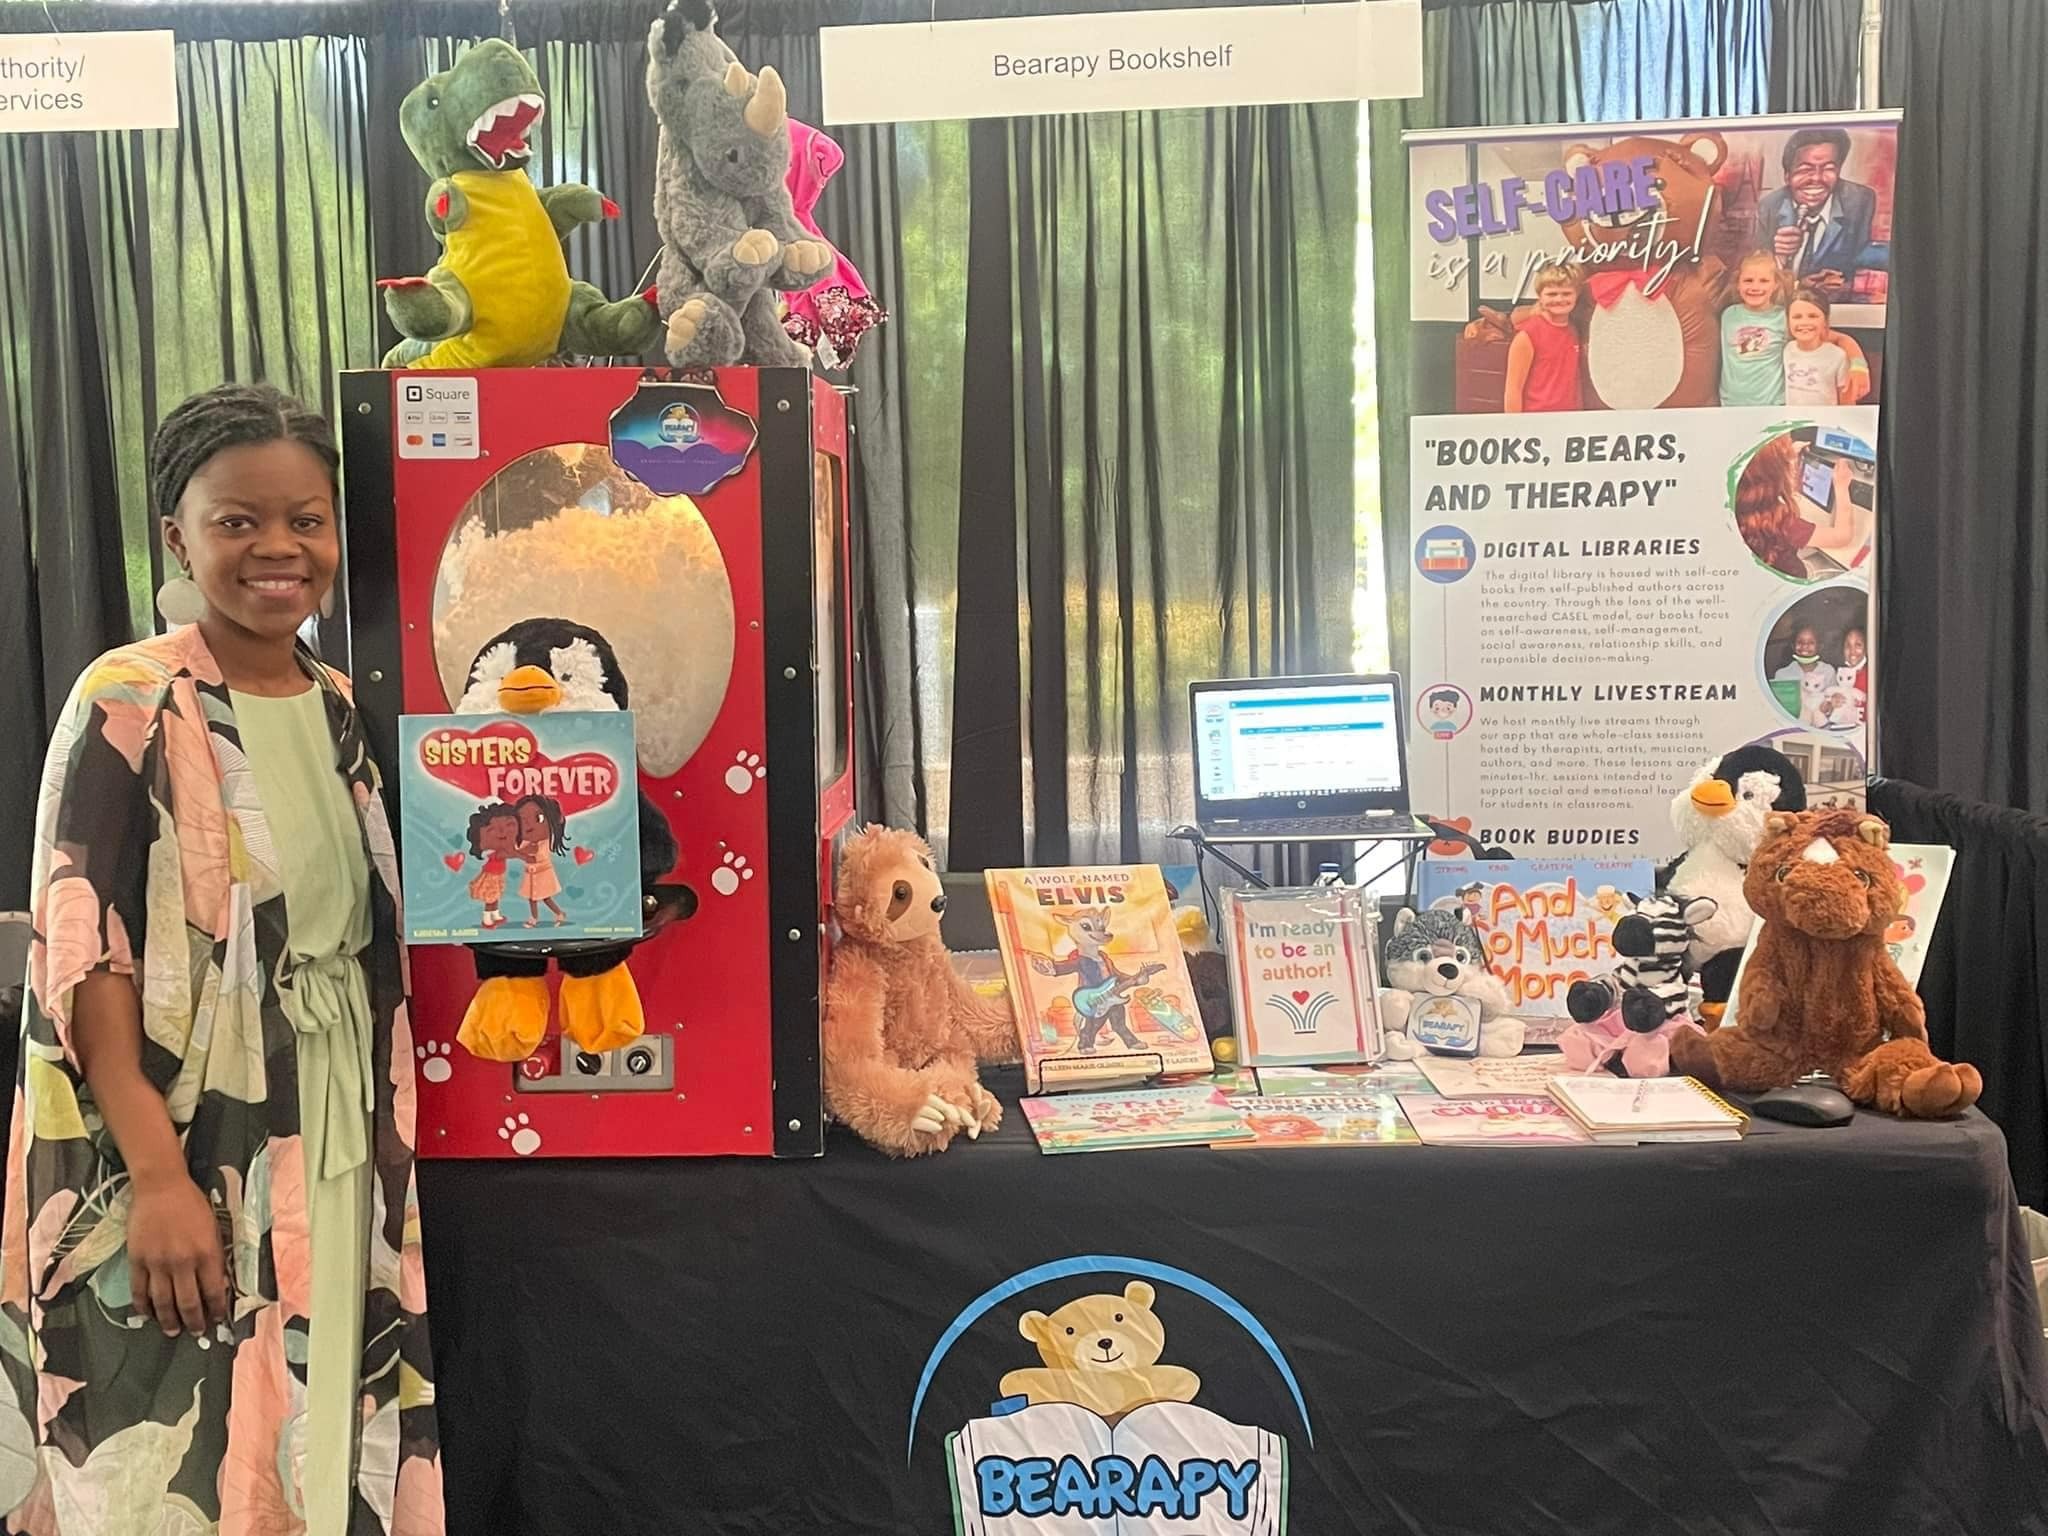 Kanesha Adams with a Bearapy Booth